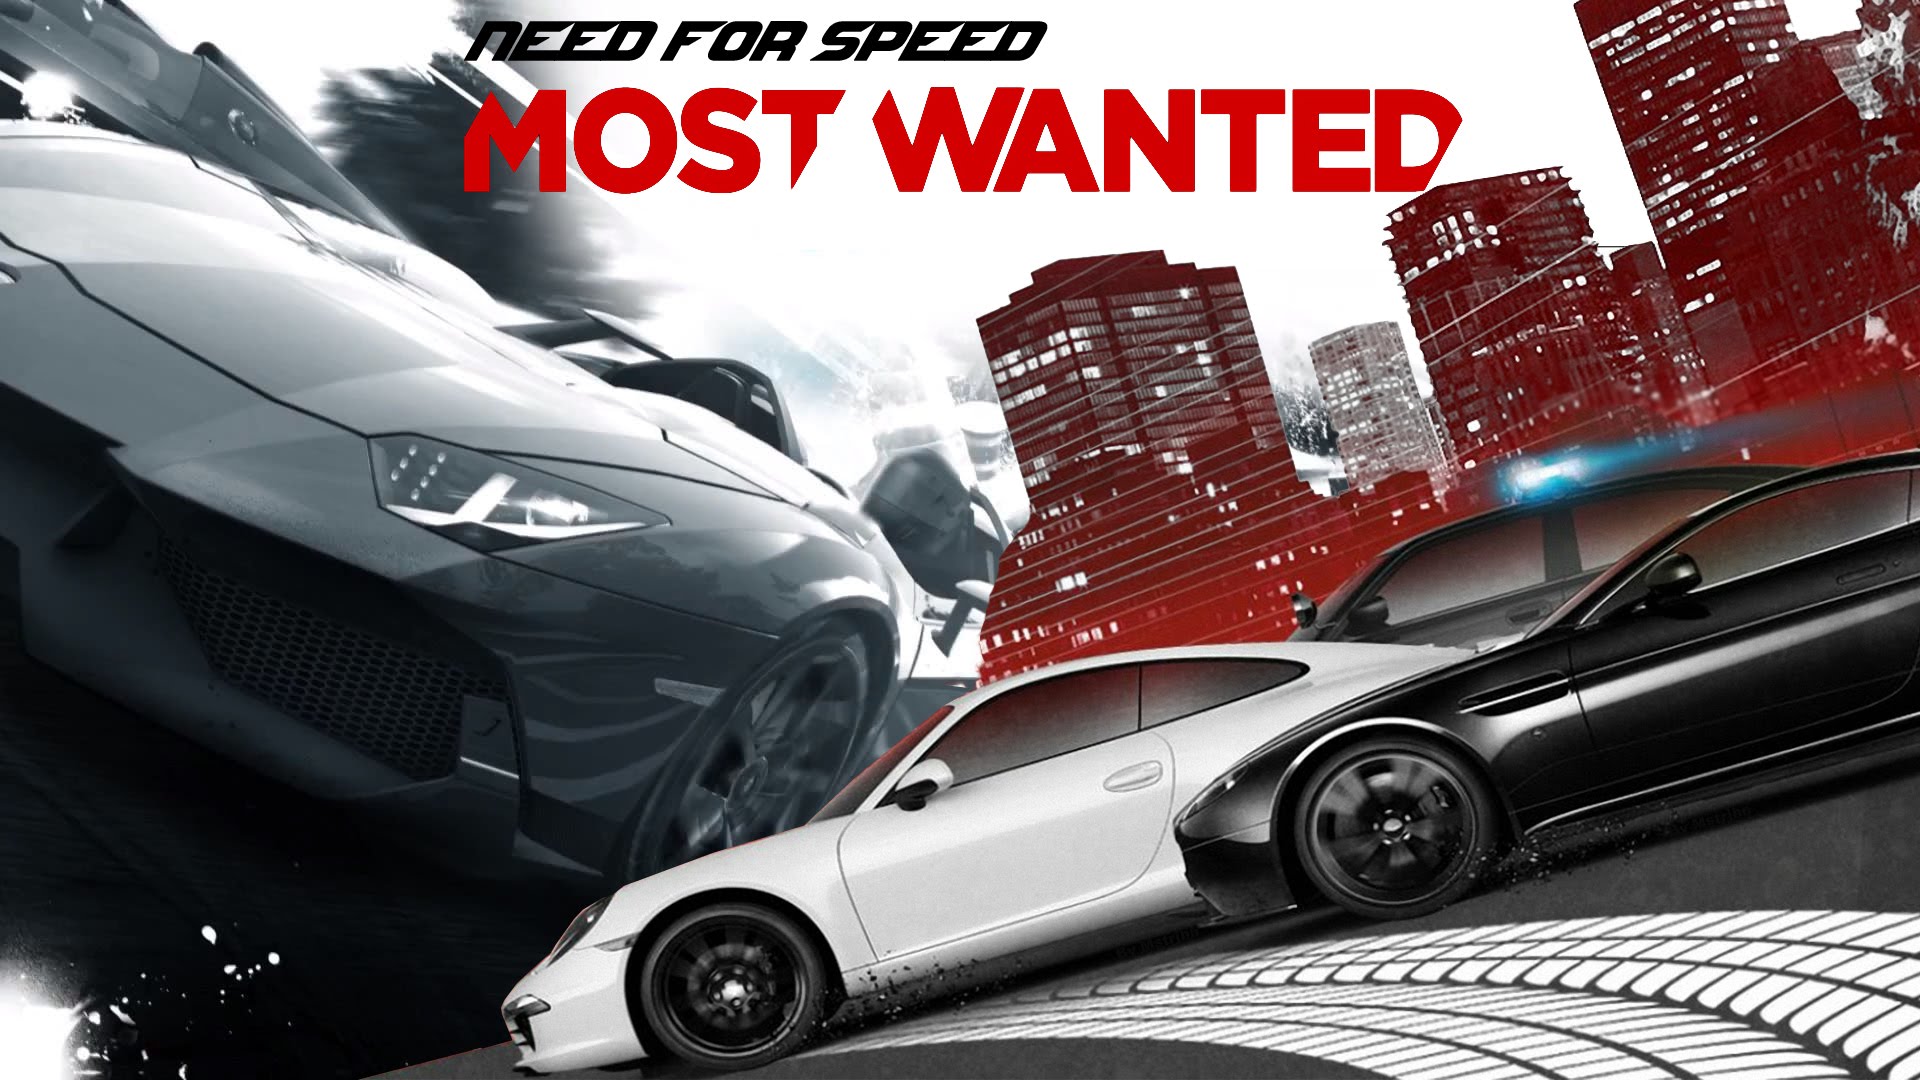 Need For Speed: Most Wanted #20